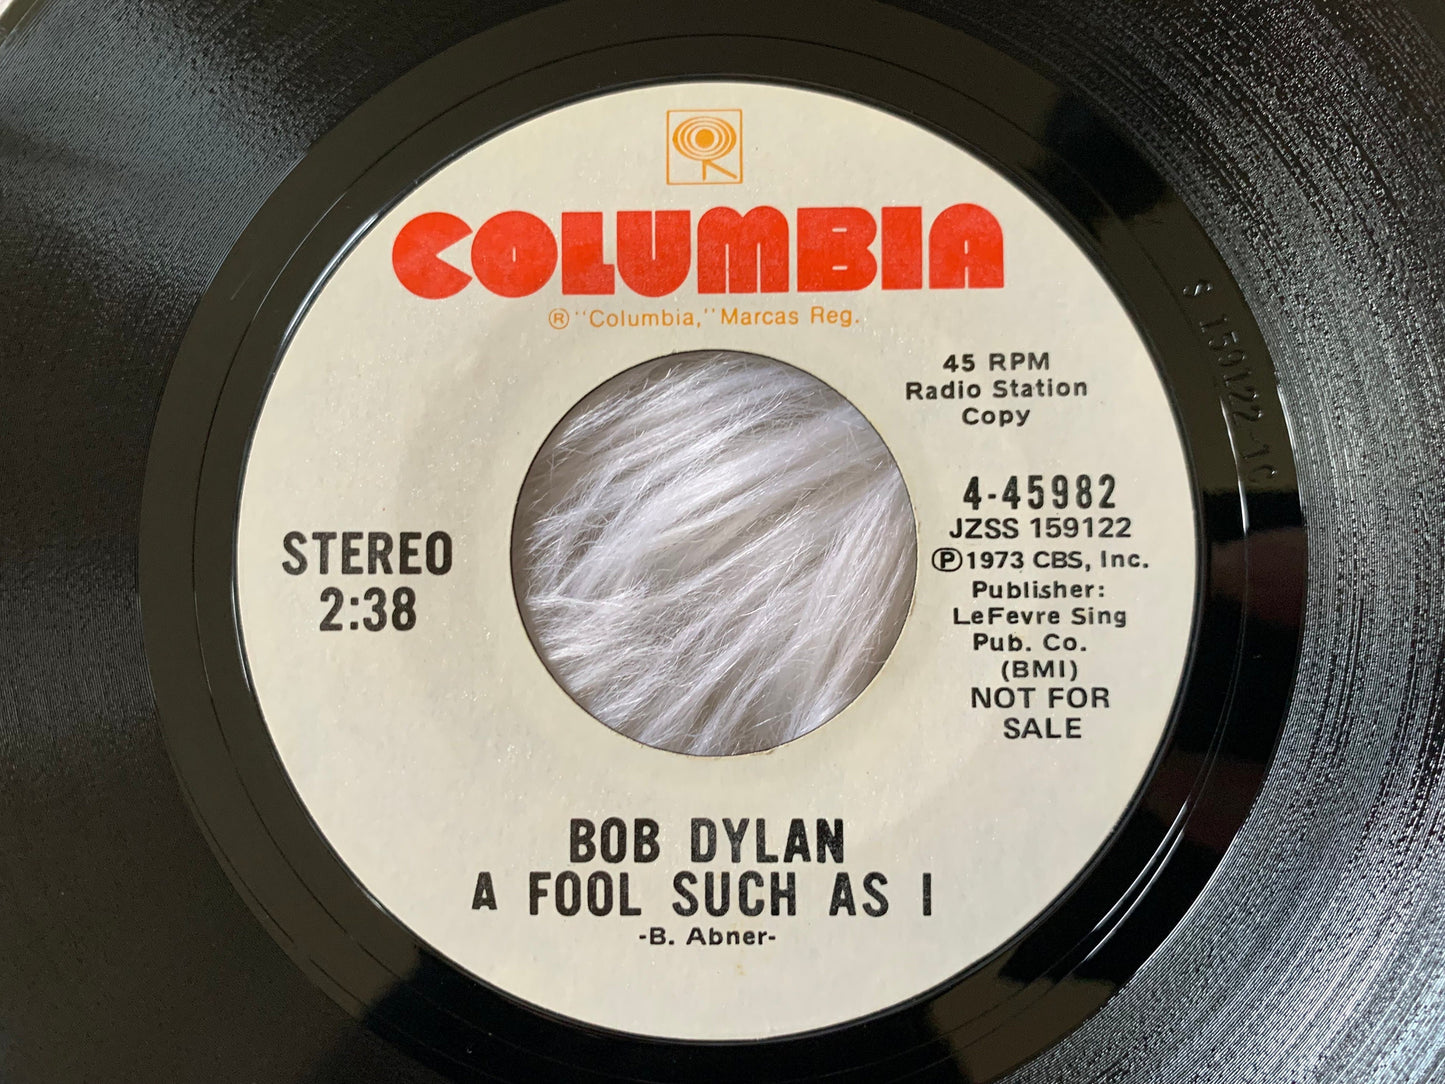 Bob Dylan A Fool Such As I, Mono/Stereo 1973 Columbia 4-45982 Vinyl Records 70's Bob Dylan Singles 45 RPM 7" Records